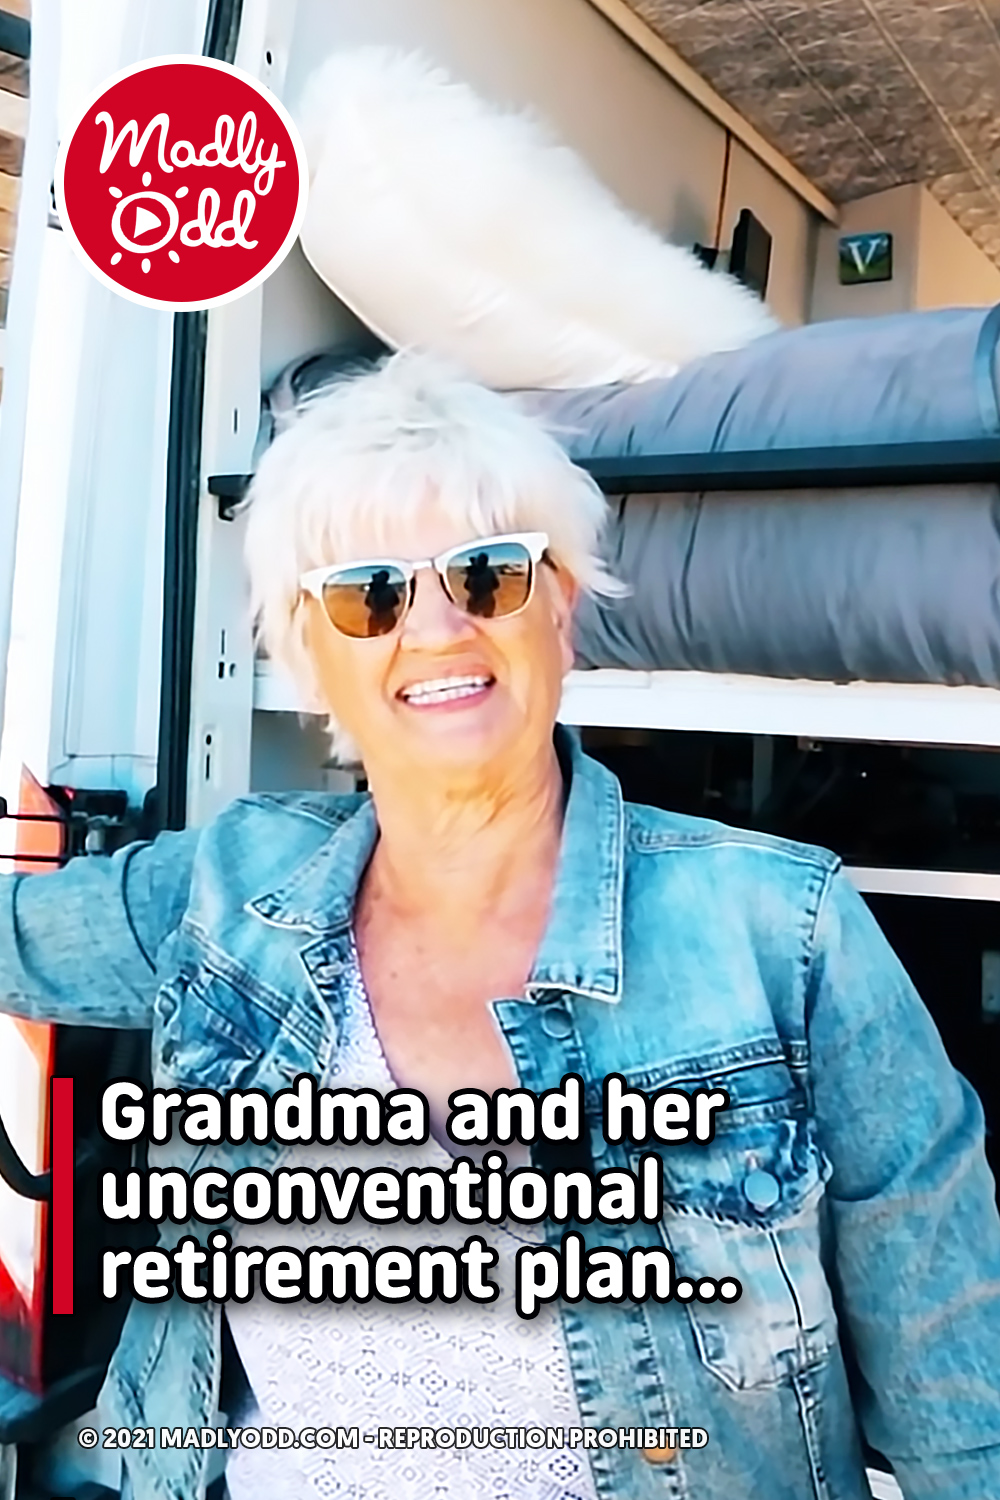 Grandma and her unconventional retirement plan...